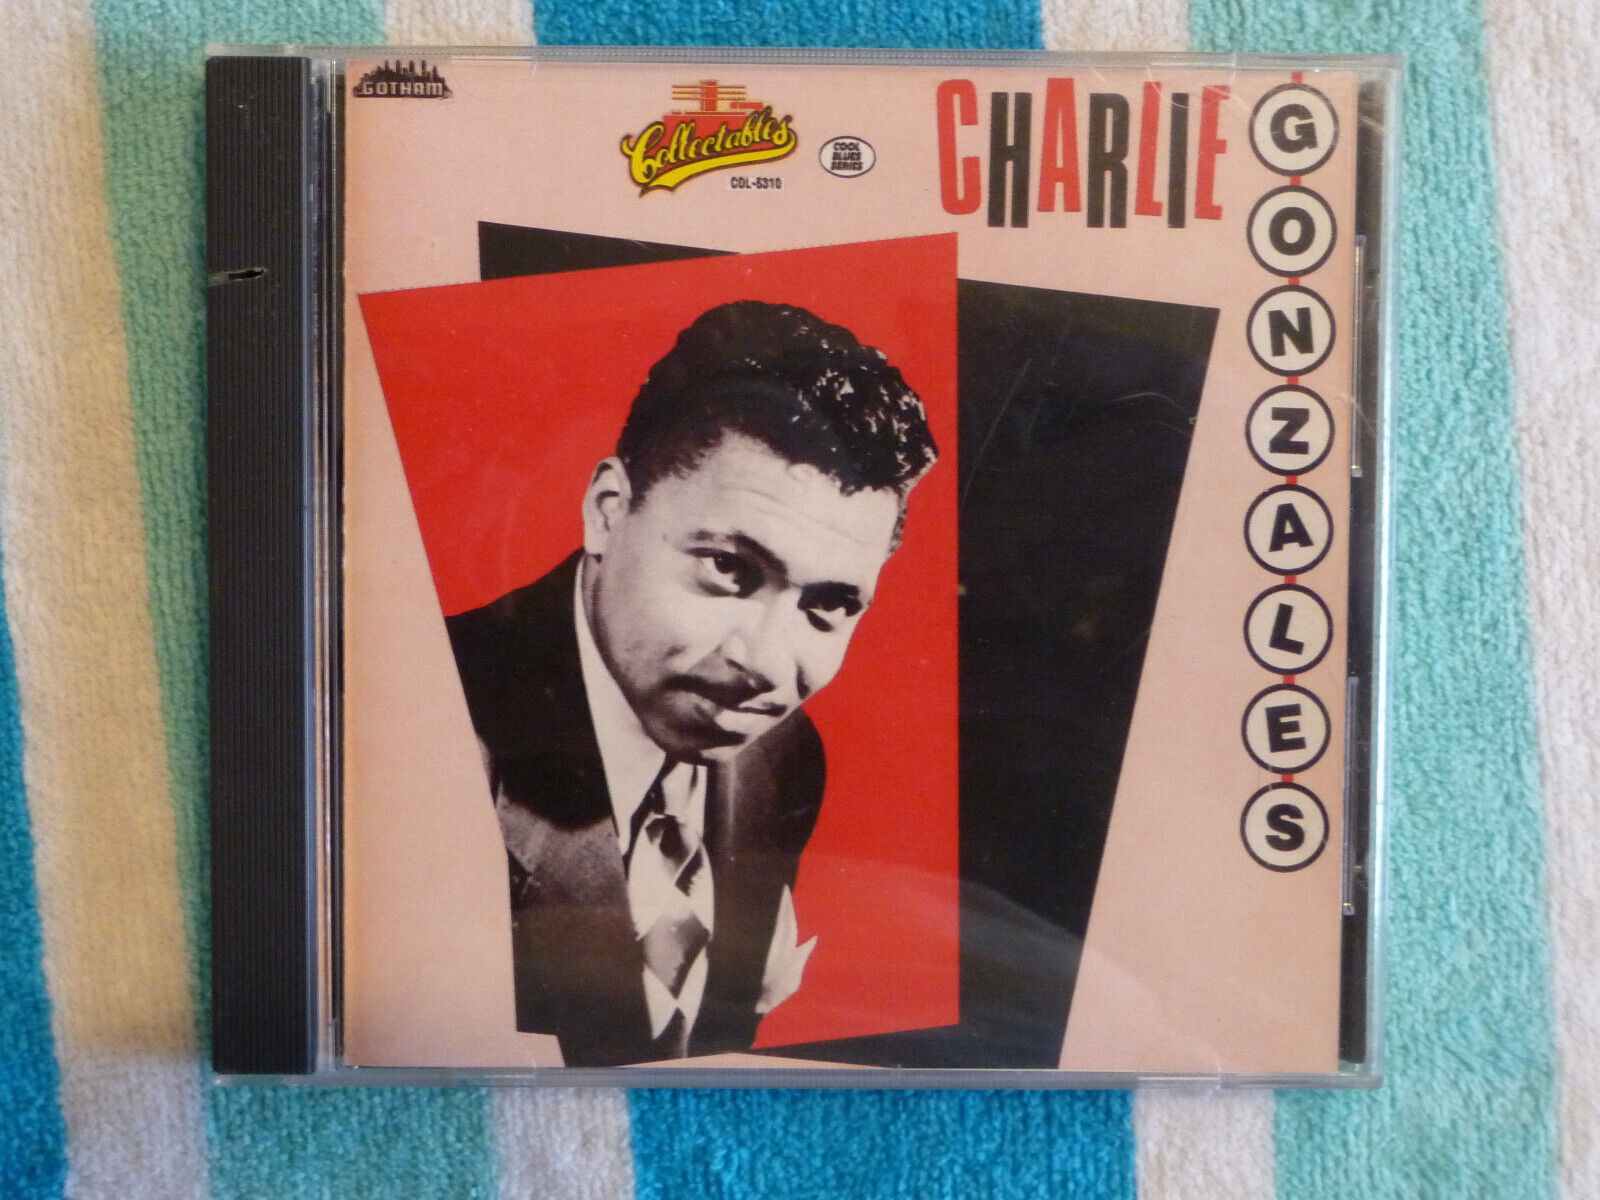 CHARLIE GONZALES Self Titled CD Collectables 1990 R&B JUMP BLUES